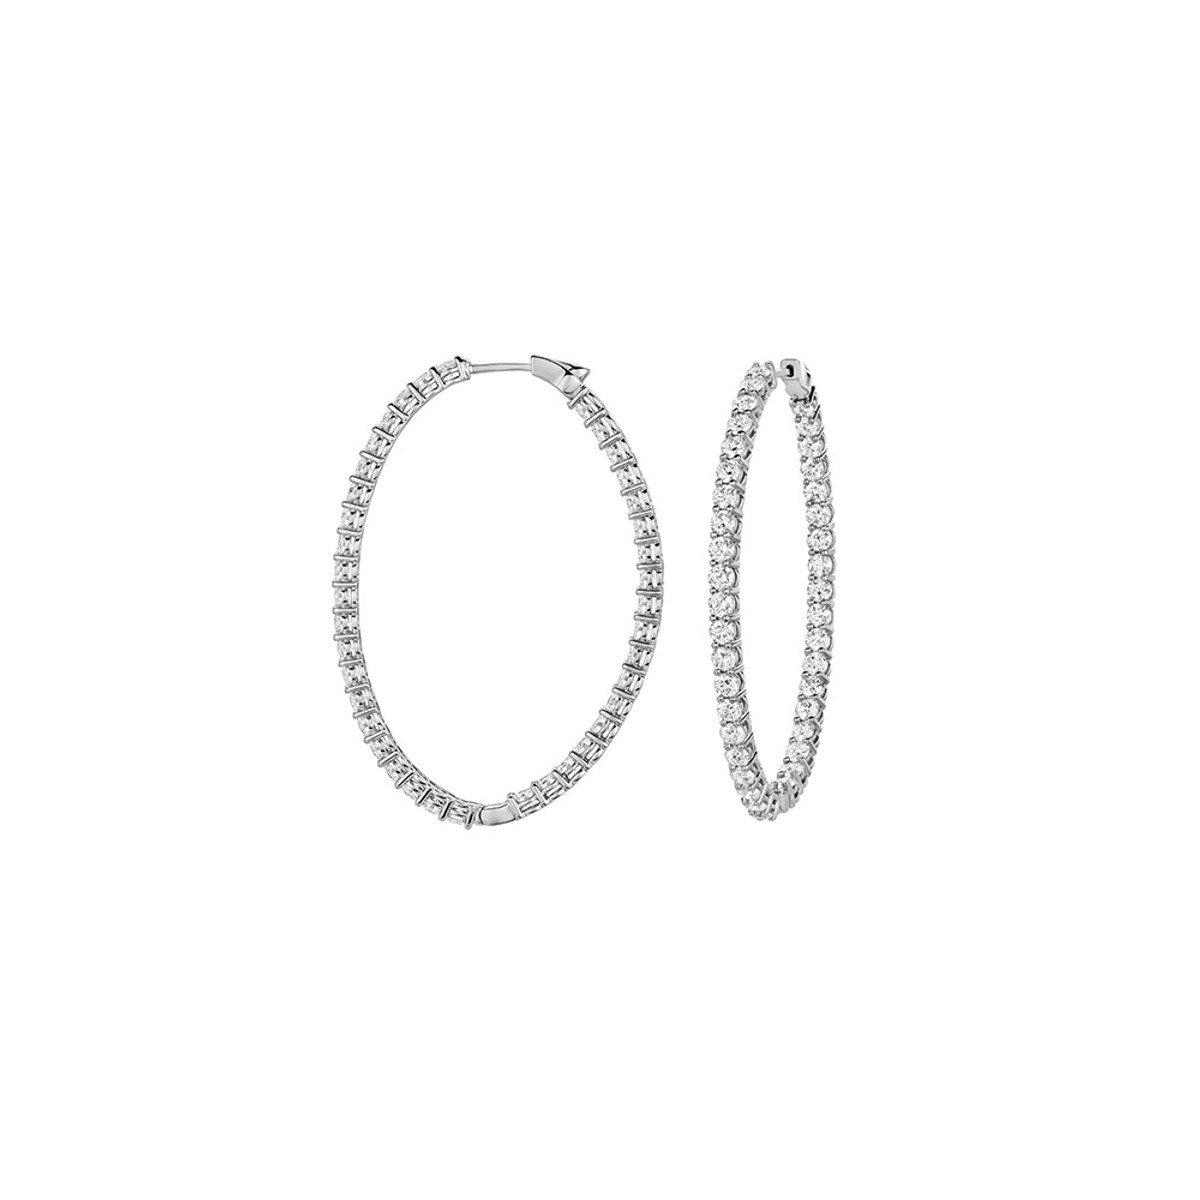 Hyde Park Collection 18K White Gold Diamond Hoop Earrings-43655 Product Image